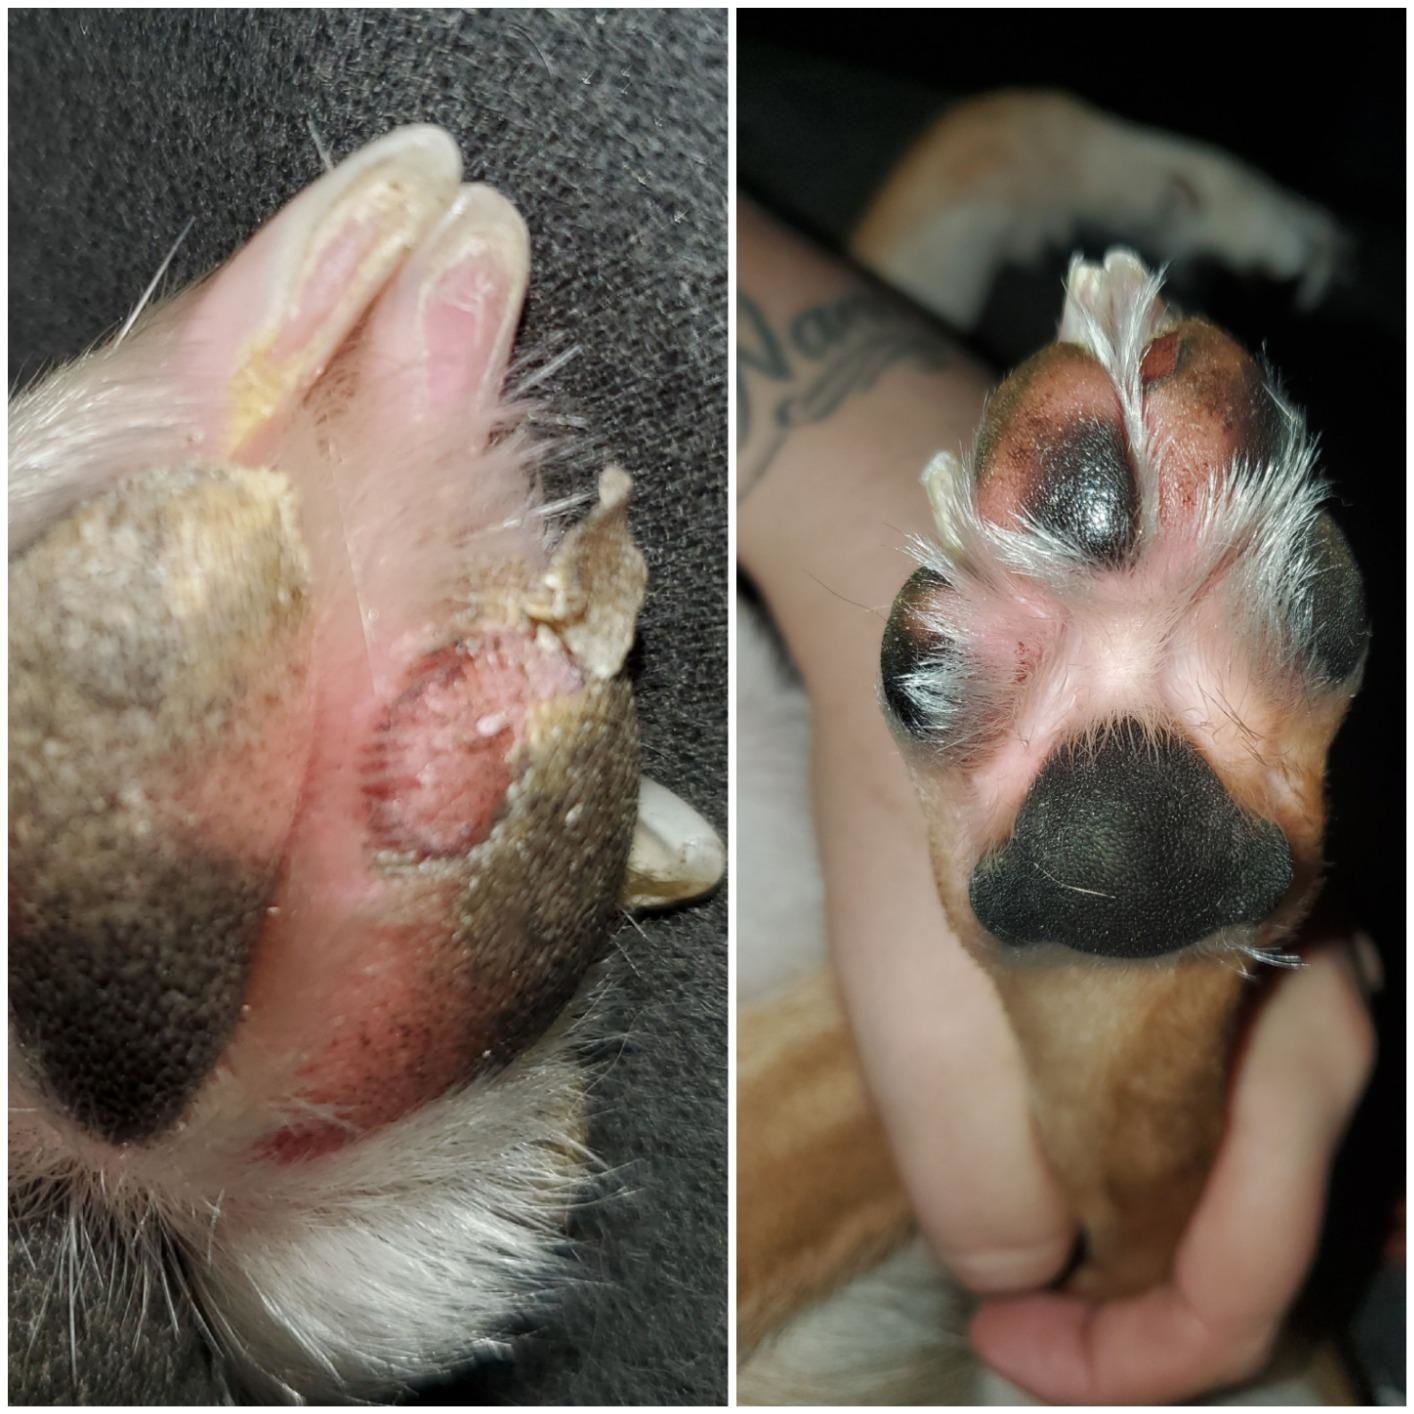 before and after images of a dog's cracked paw healing over time